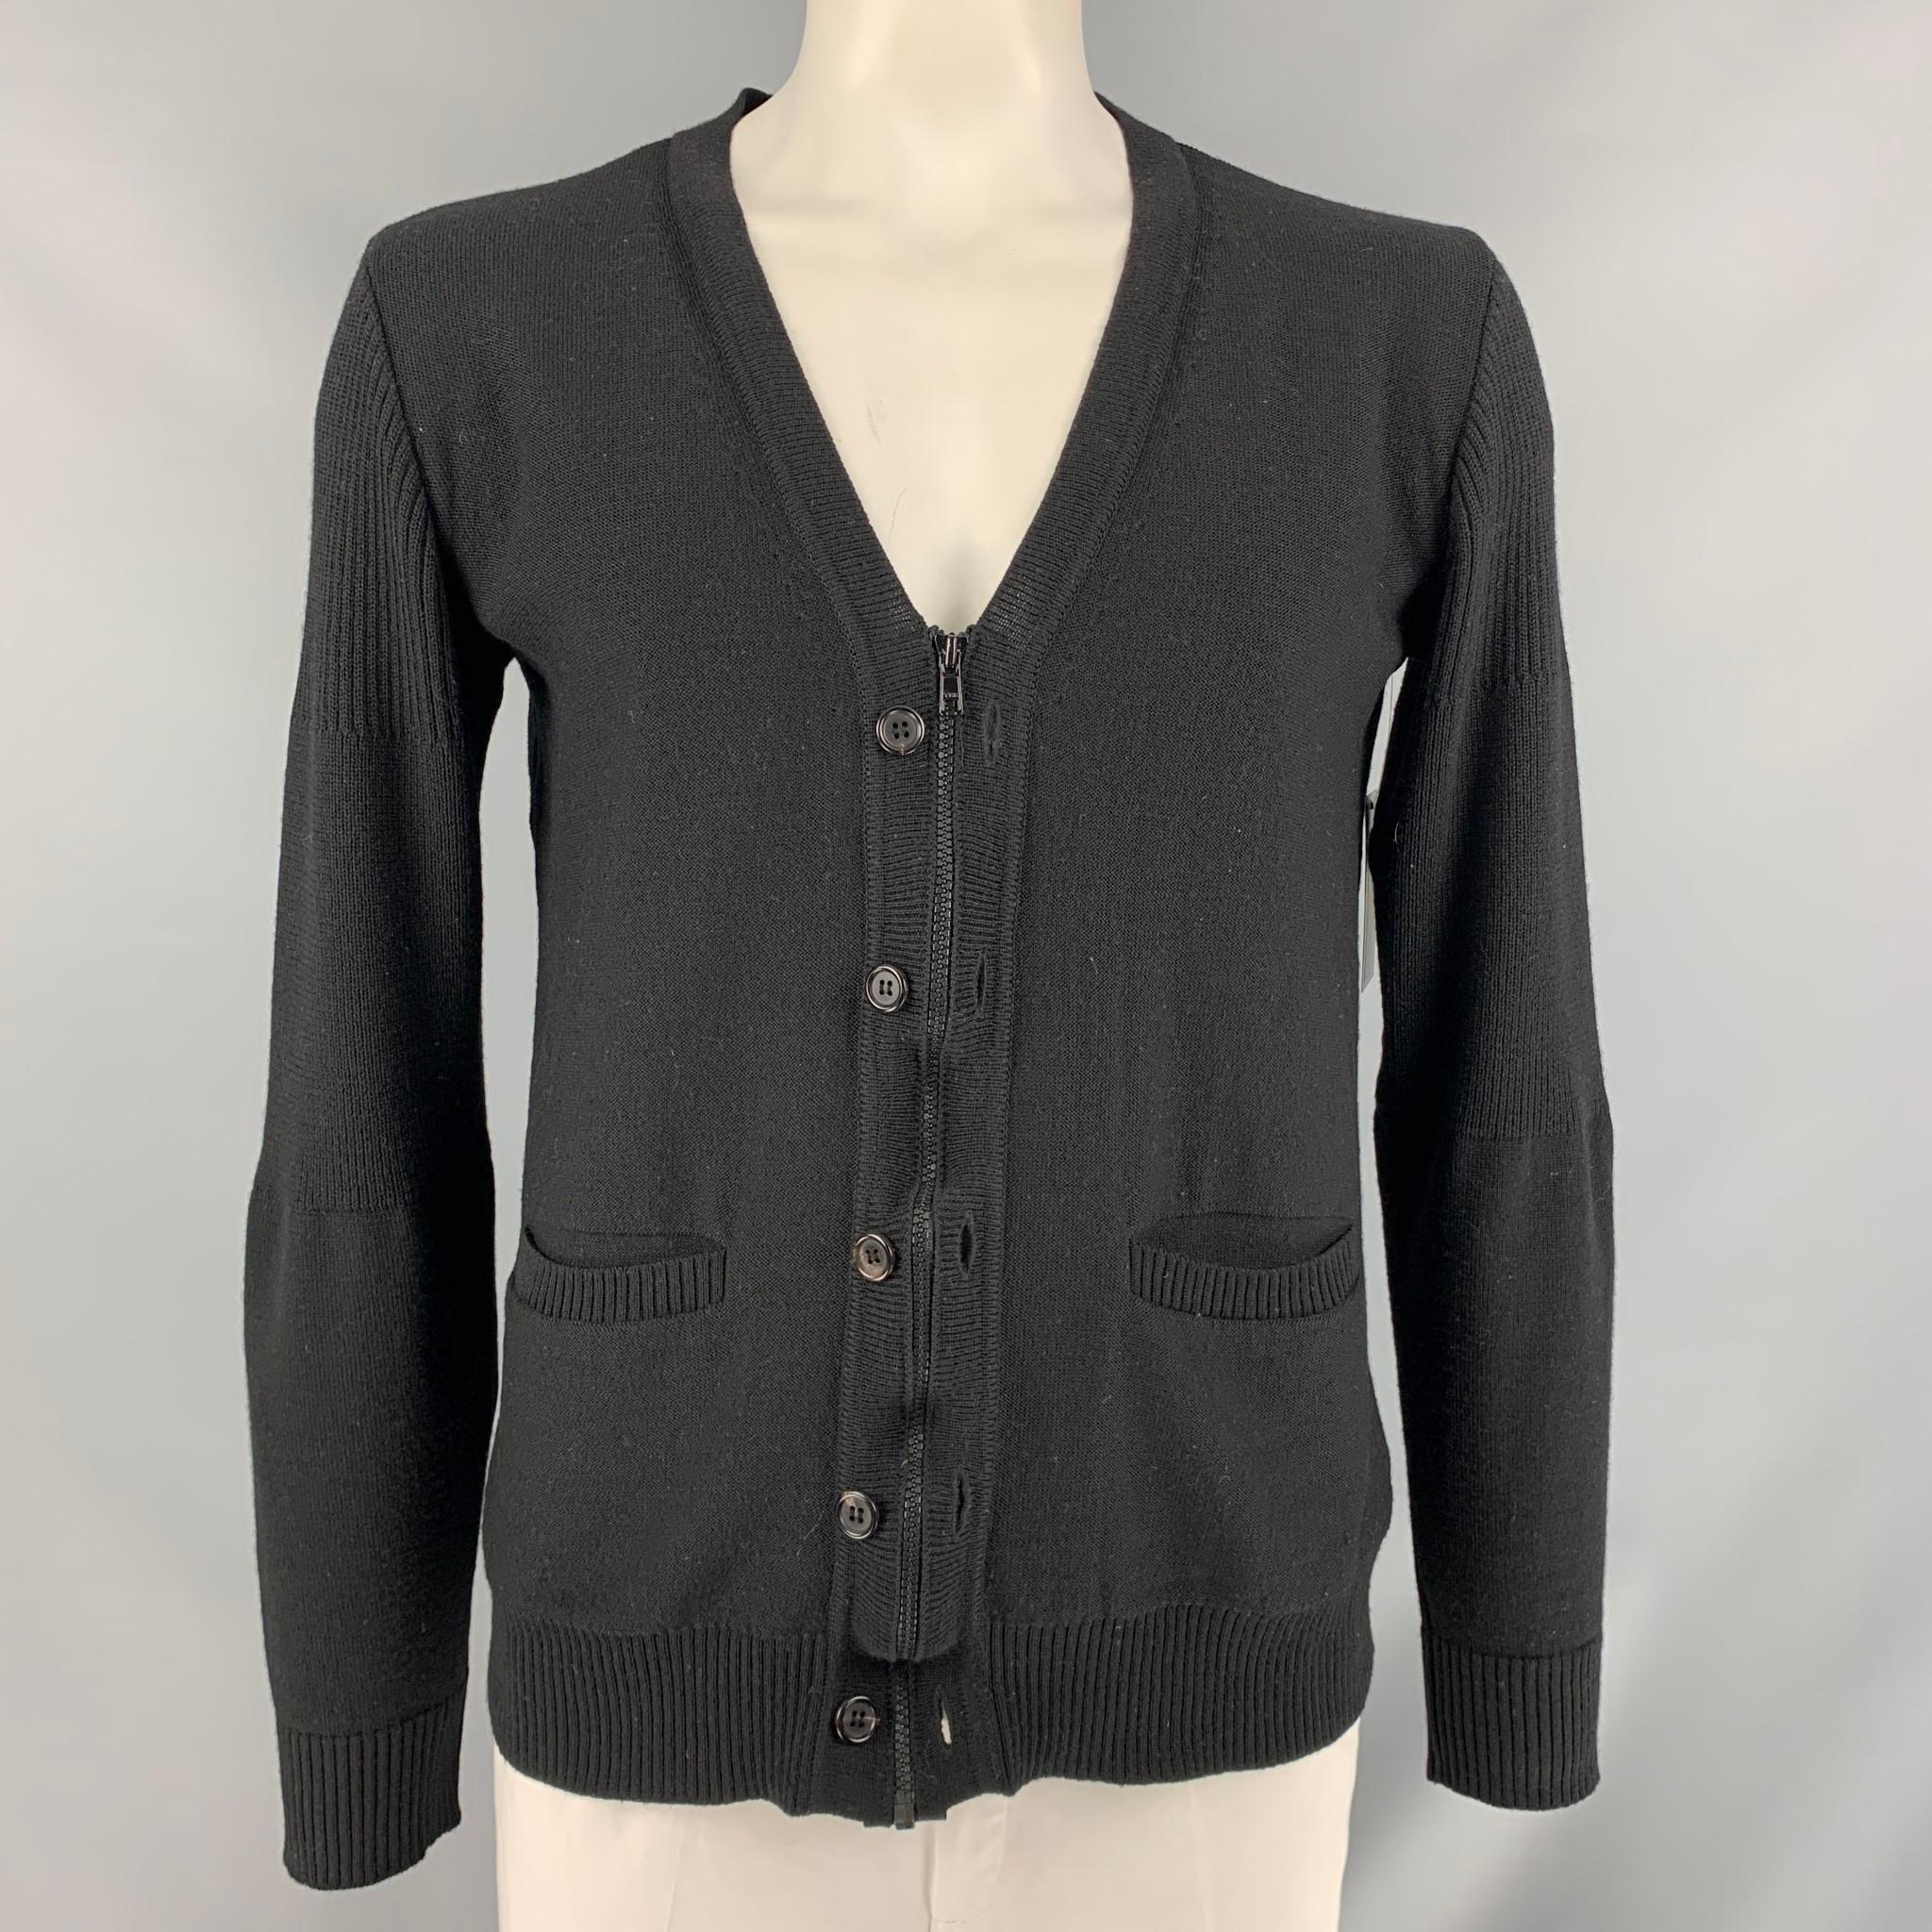 UNDERCOVER long sleeve cardigan comes in black knitted wool featuring a V-neck and zip up and buttoned closure. Made in Japan.

Good Pre-Owned Condition. Moderate Piling at Back.
Marked: 4

Measurements:

Shoulder: 18 in
Chest: 46 in
Sleeve: 28